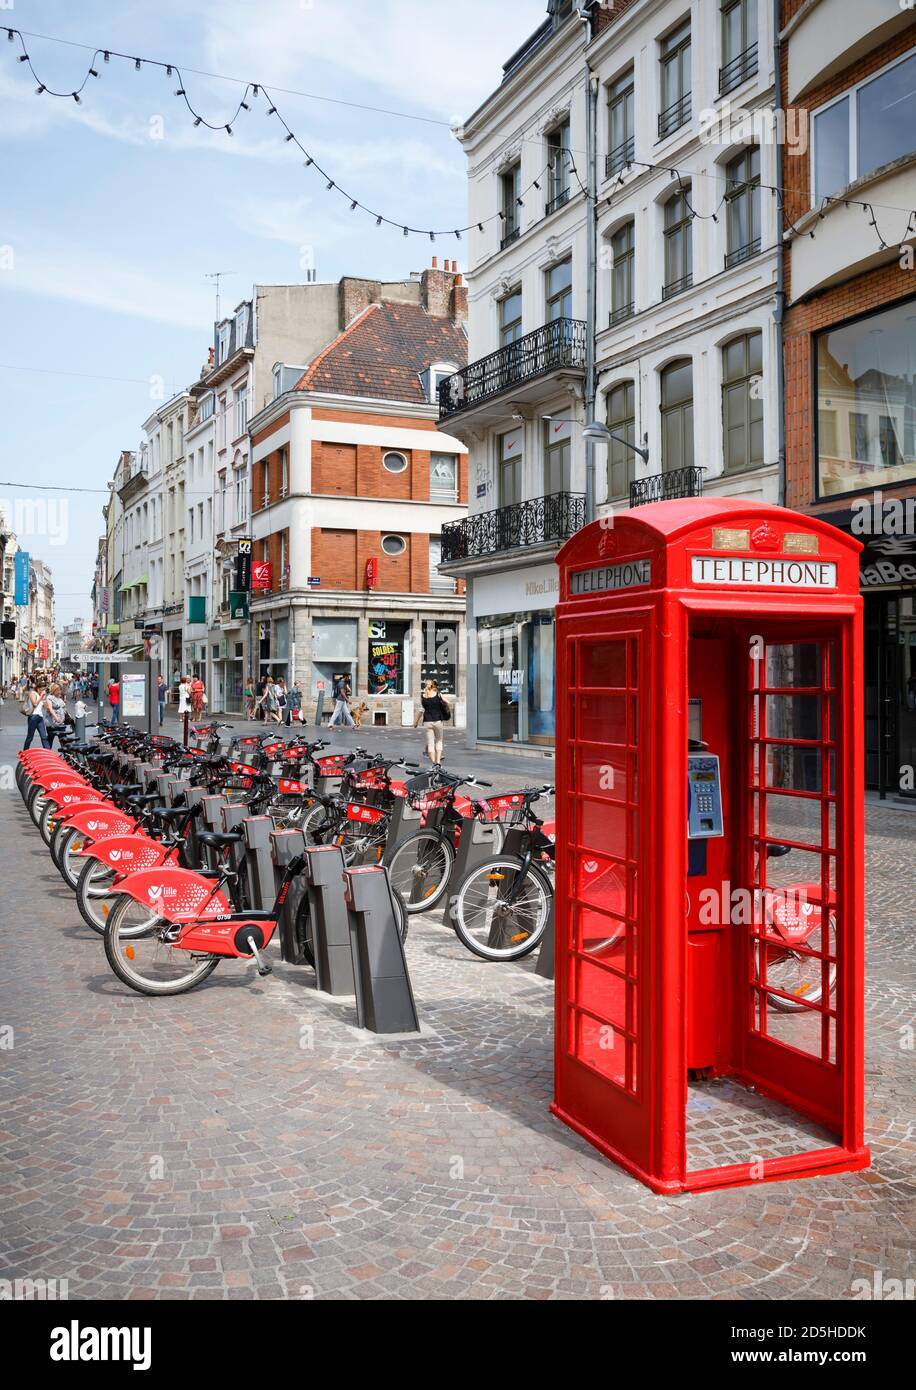 LILLE, FRANCE - July 18, 2013. Free bike rental station and red British telephone box in a street in Lille, France Stock Photo